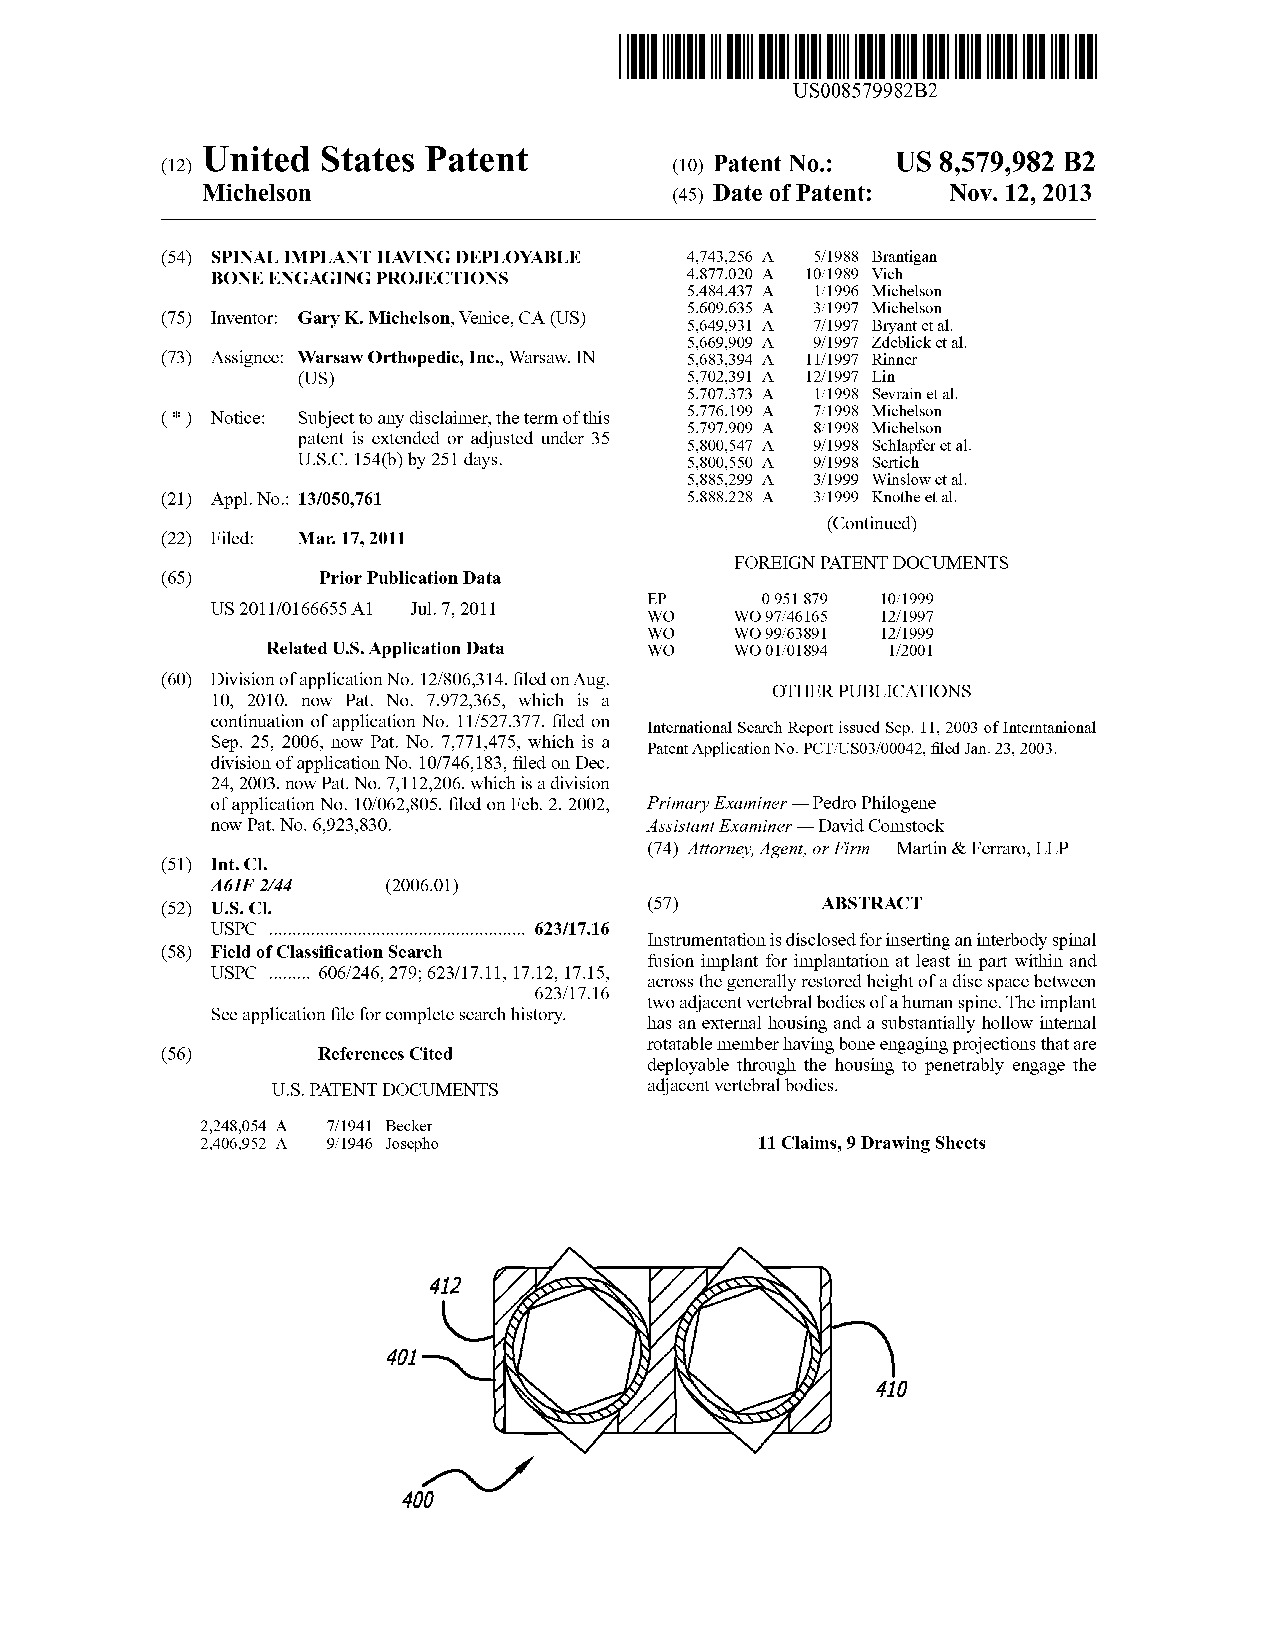 Spinal implant having deployable bone engaging projections - Patent 8,579,982